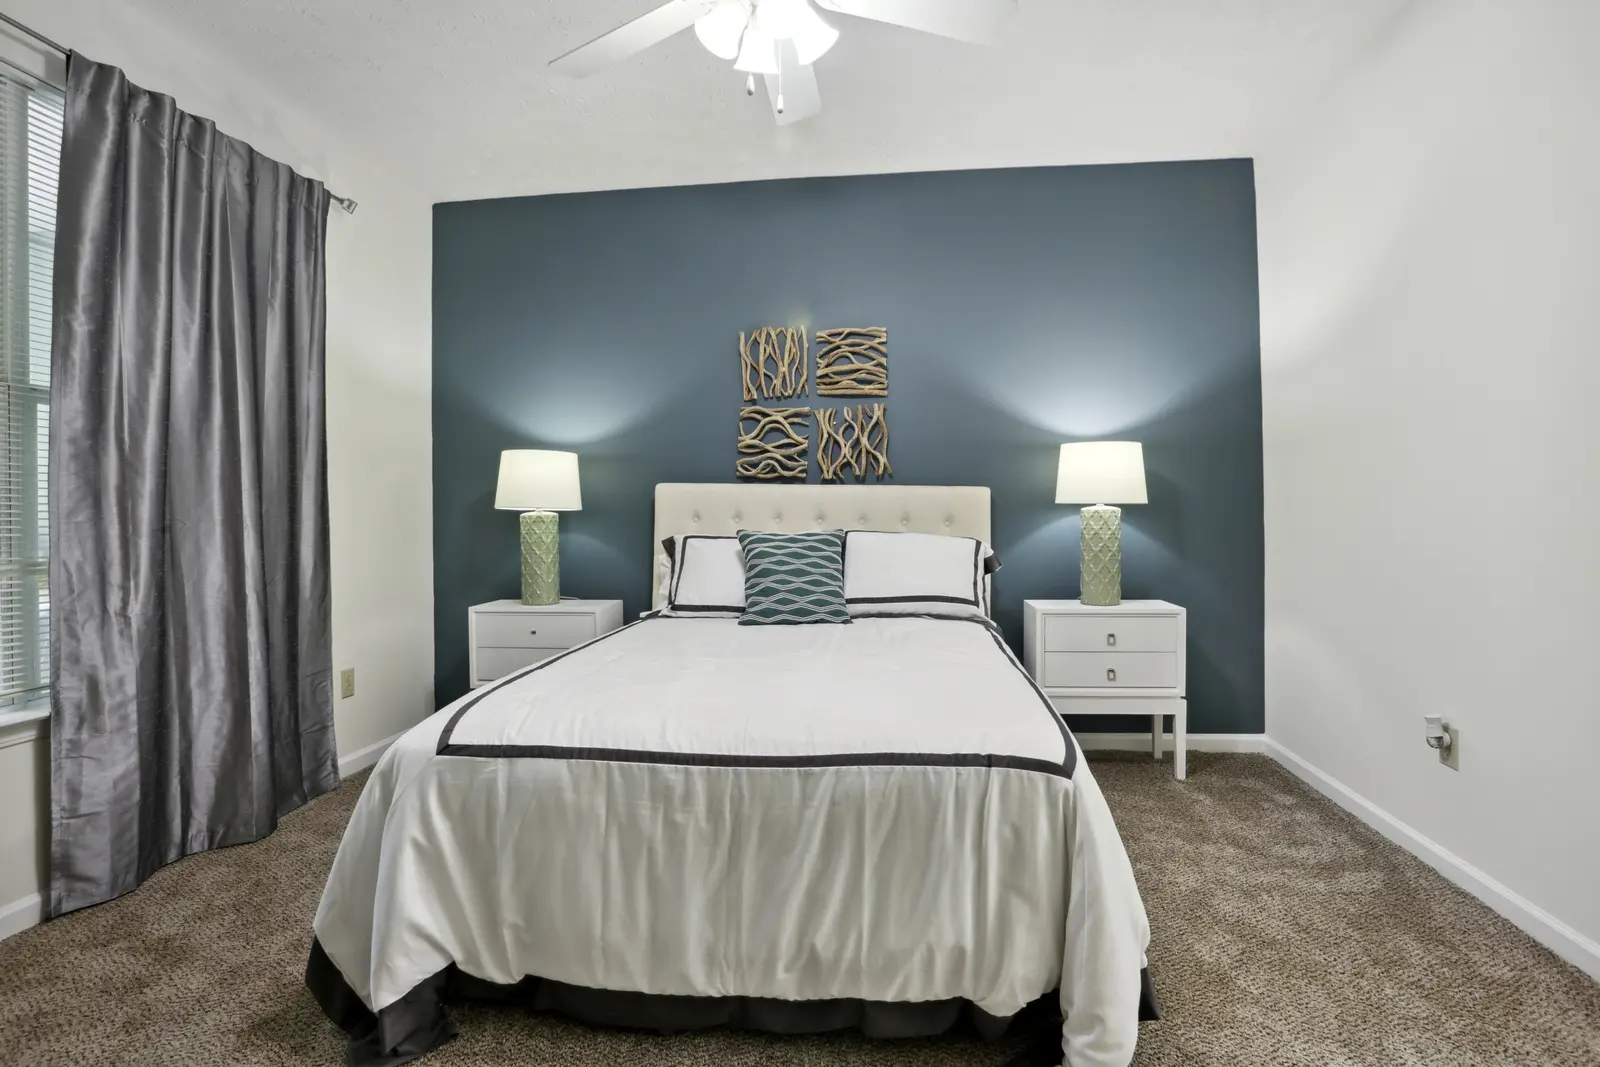 Carpeted bedroom with blue accent wall